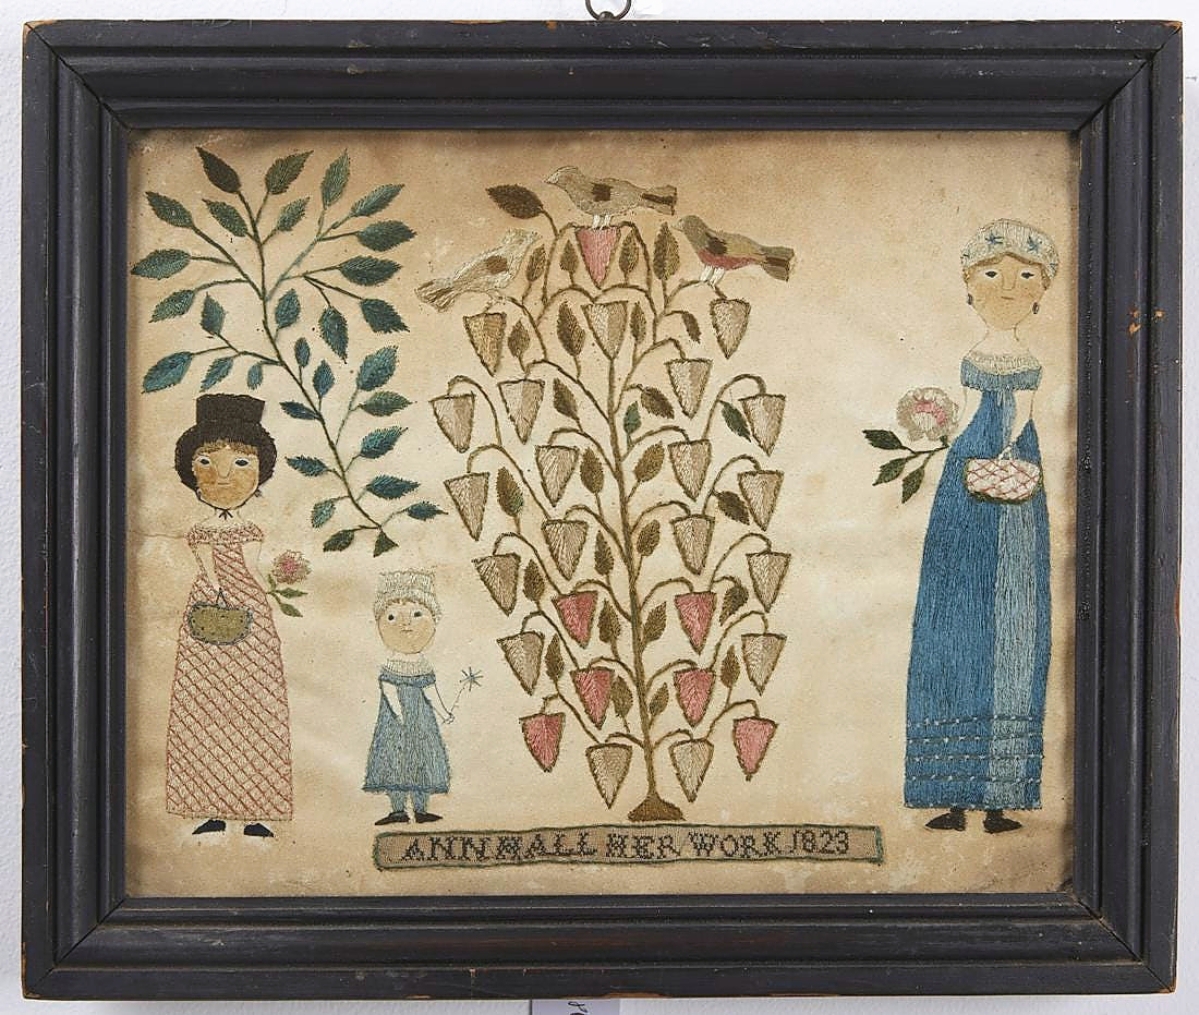 The sale’s top lot was a folk art needlework on paper that brought $49,200 to a collector. It was underbid by David Schorsch and came from the Sevatson collection. The banner reads “Ann Hall Her Work 1823.”